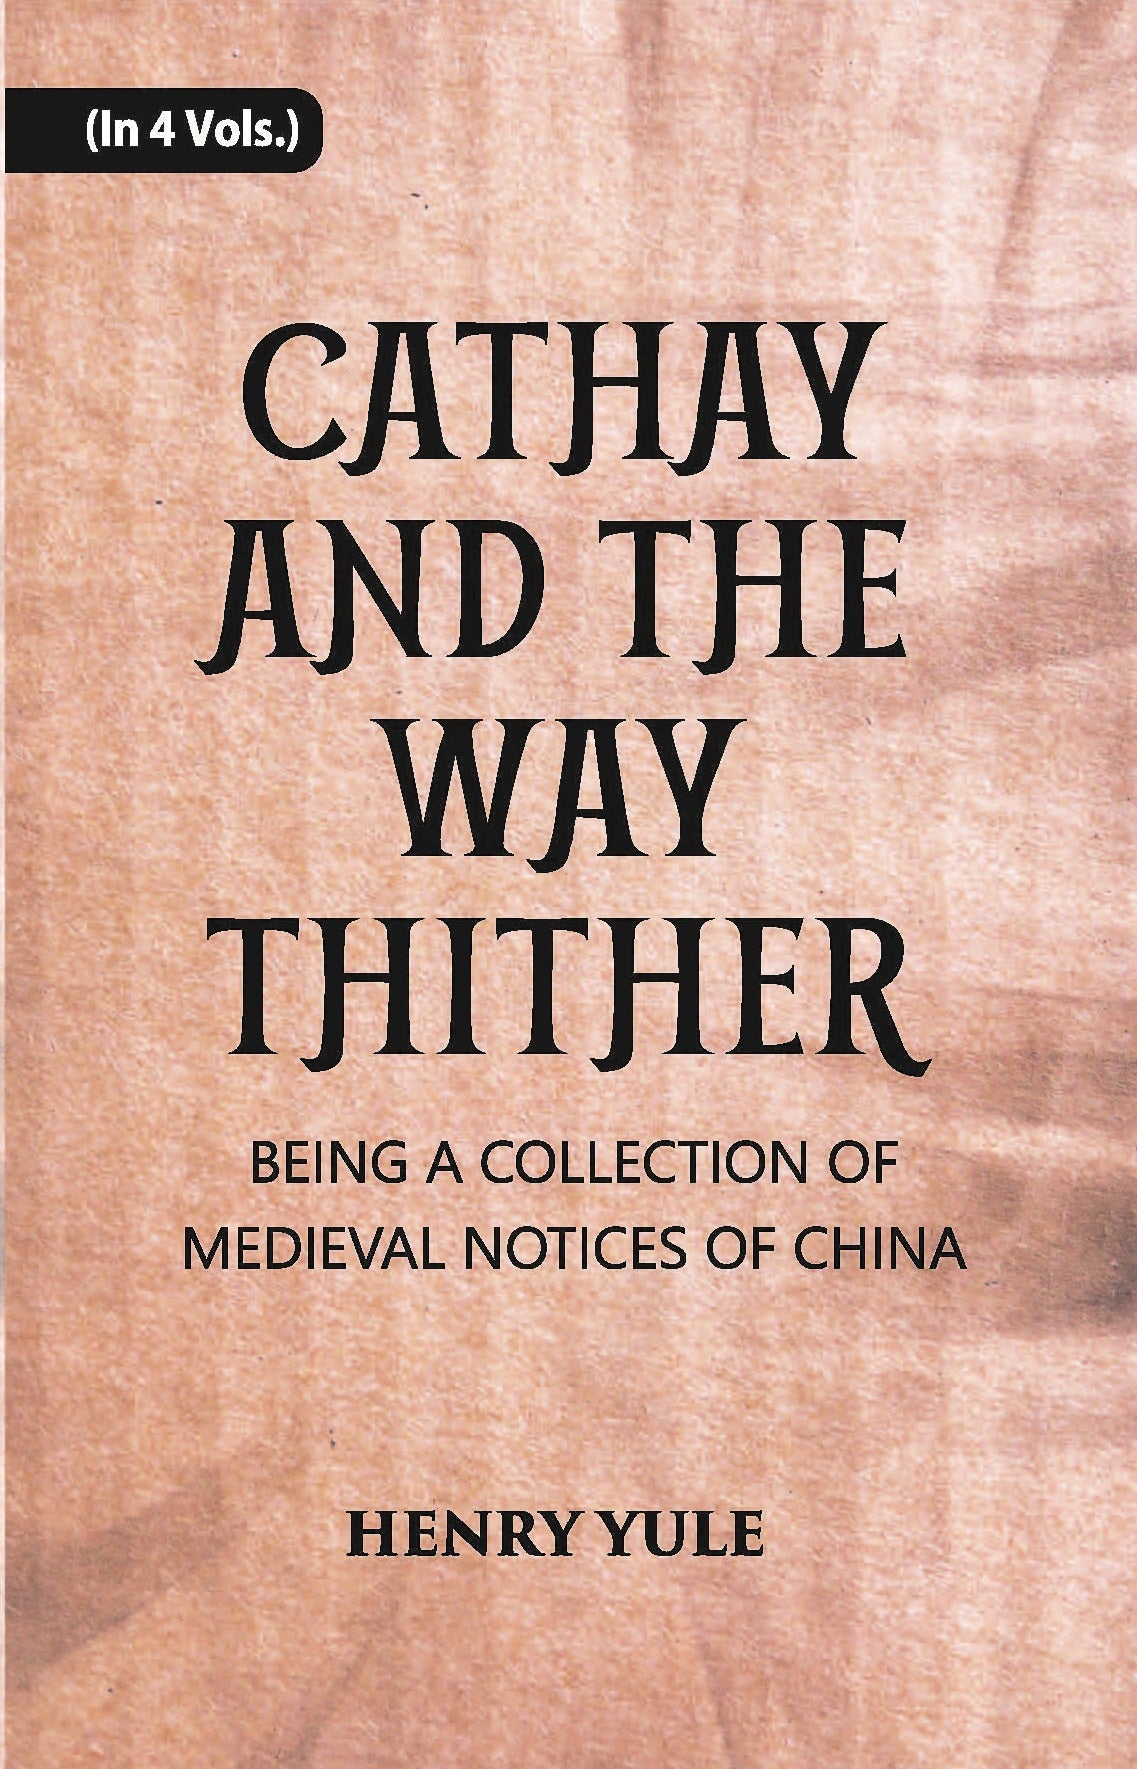 Cathay And The Way Thither: Being A Collection Of Medieval Notices Of China Volume Vol. 4th